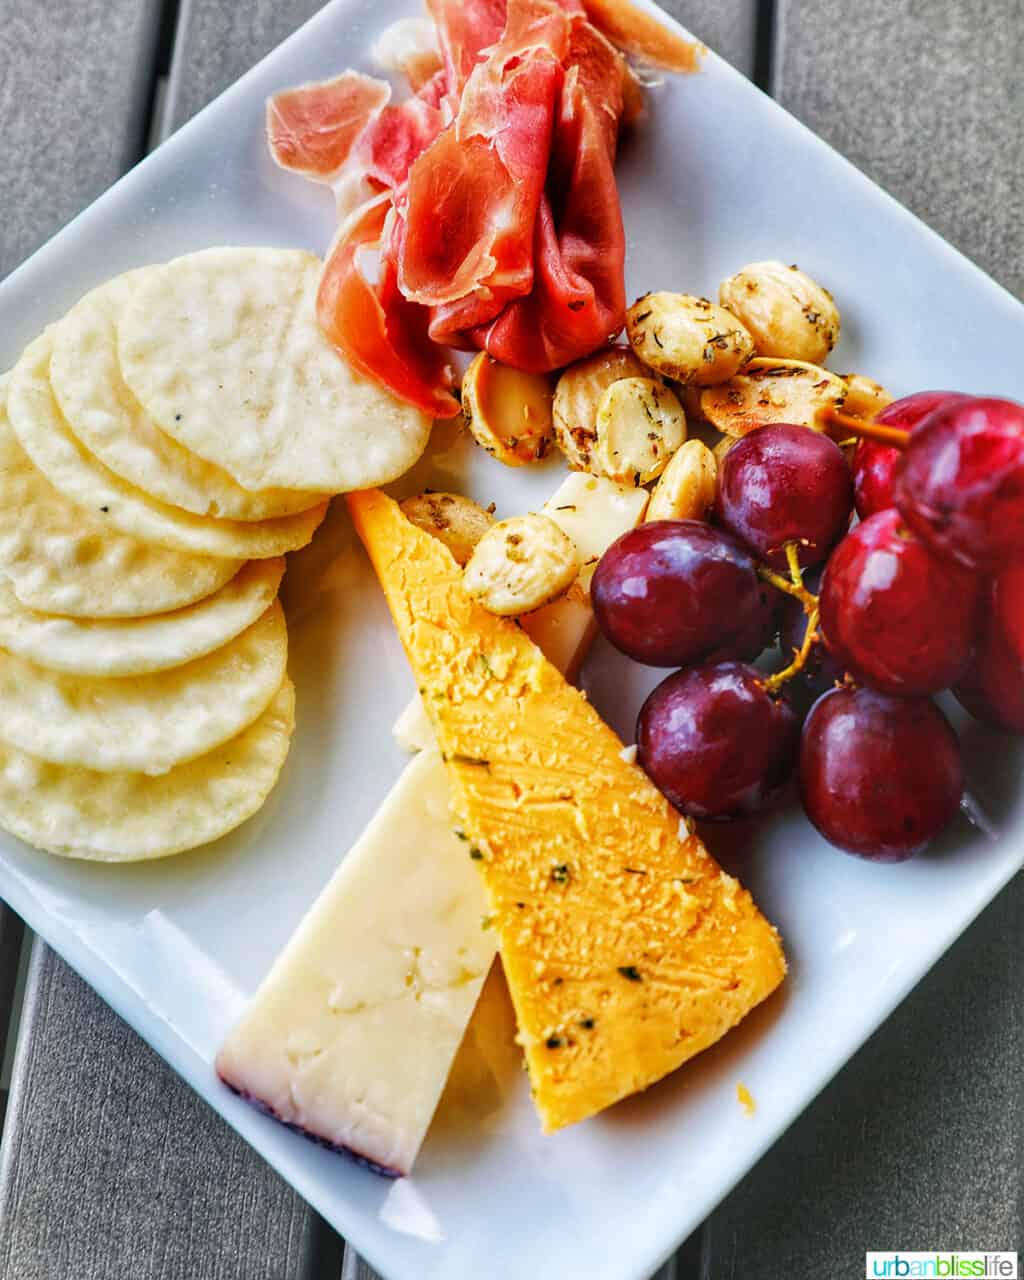 cheese and fruit plate with cheese, crackers, prosciutto, grapes, and nuts.